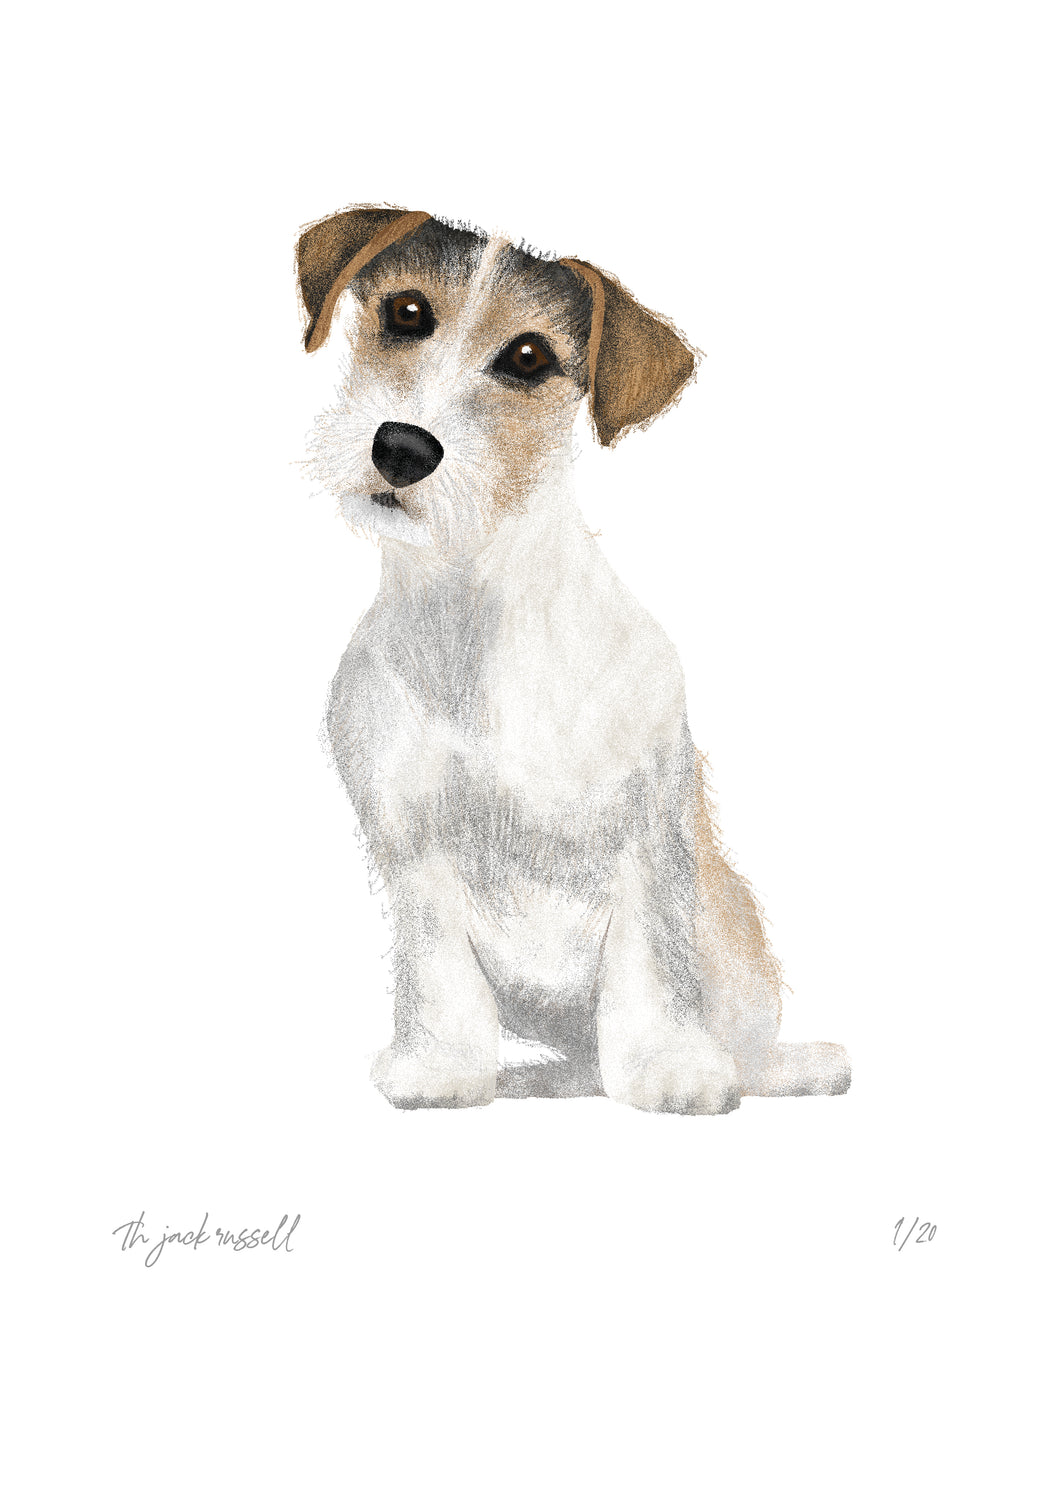 The jack russell